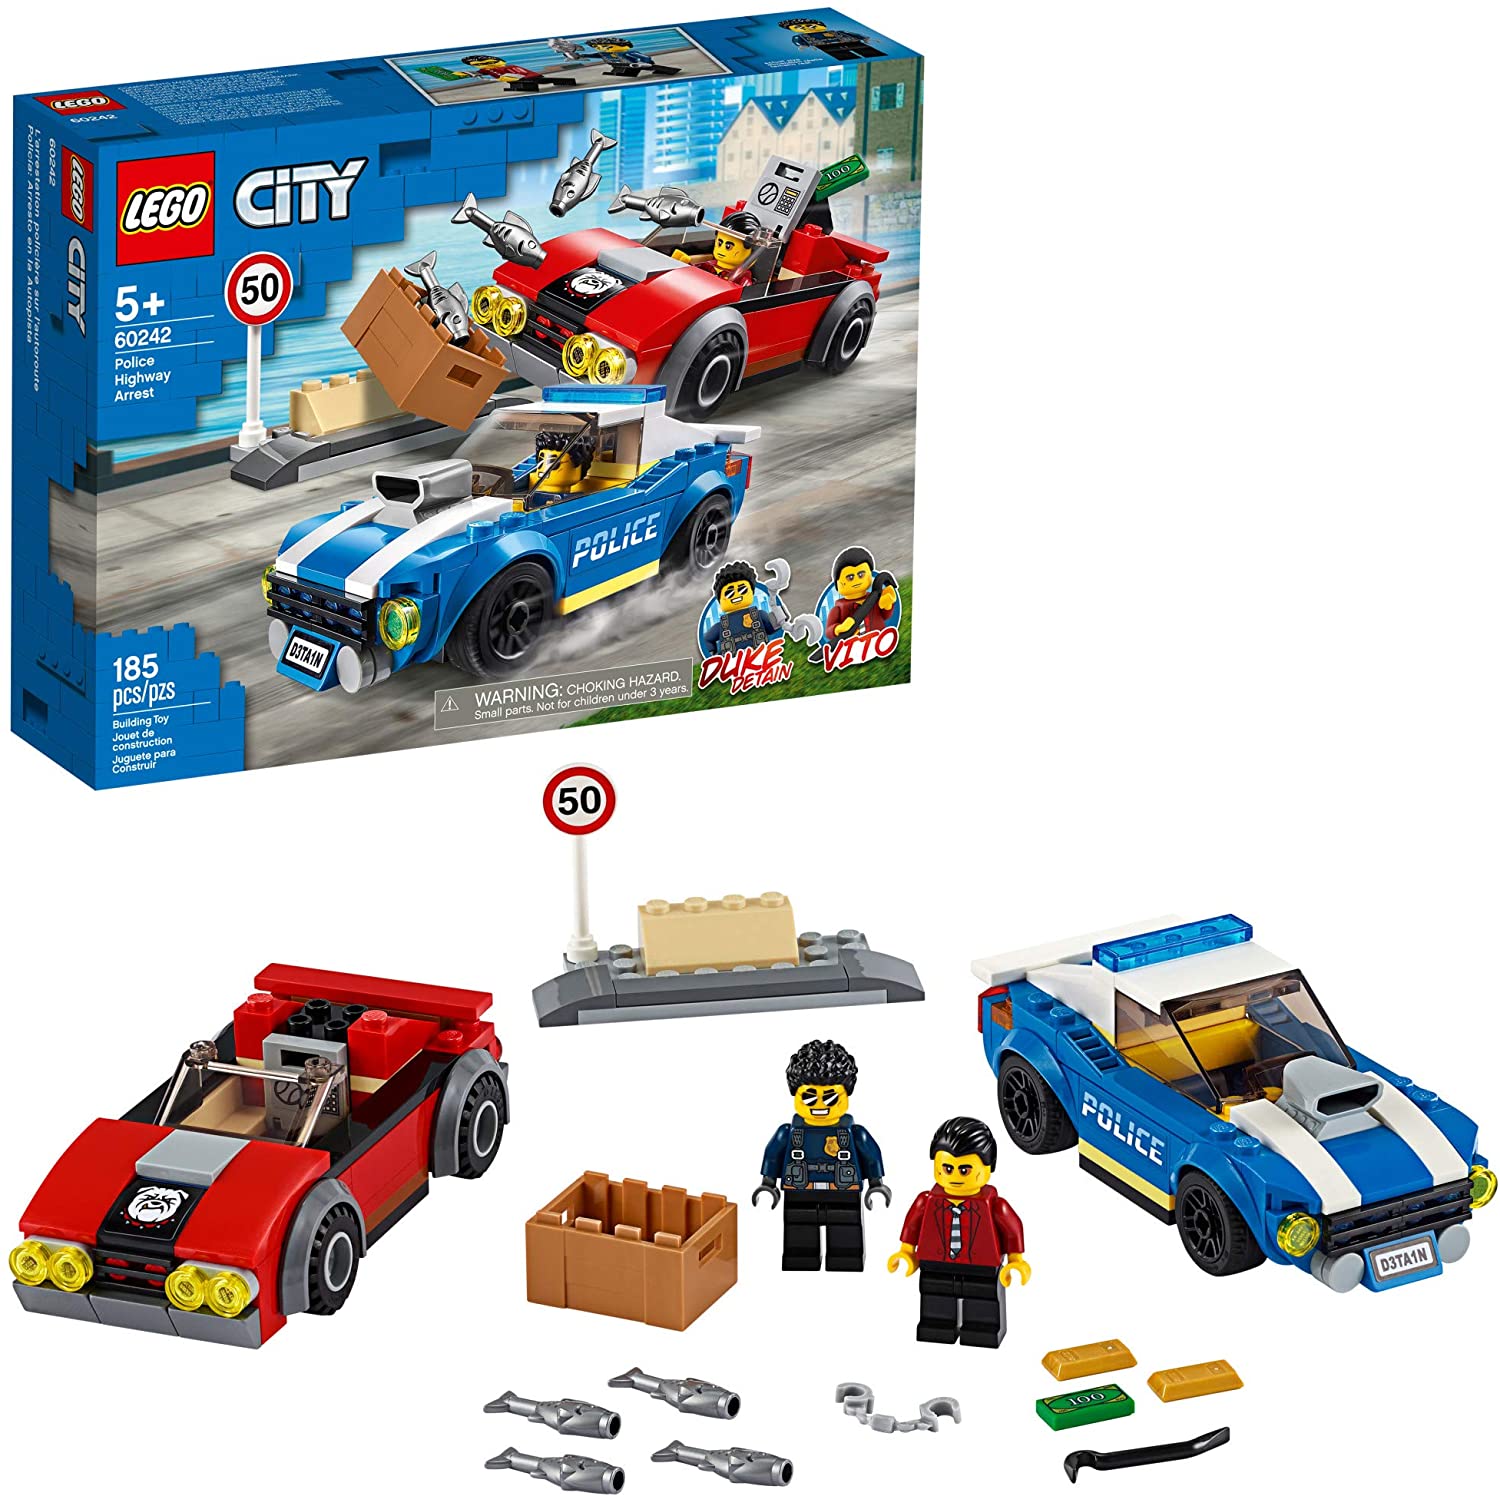 185 Pce. LEGO City Police Highway Arrest 60242 Police Toy $21.88 + Free Ship w/Prime